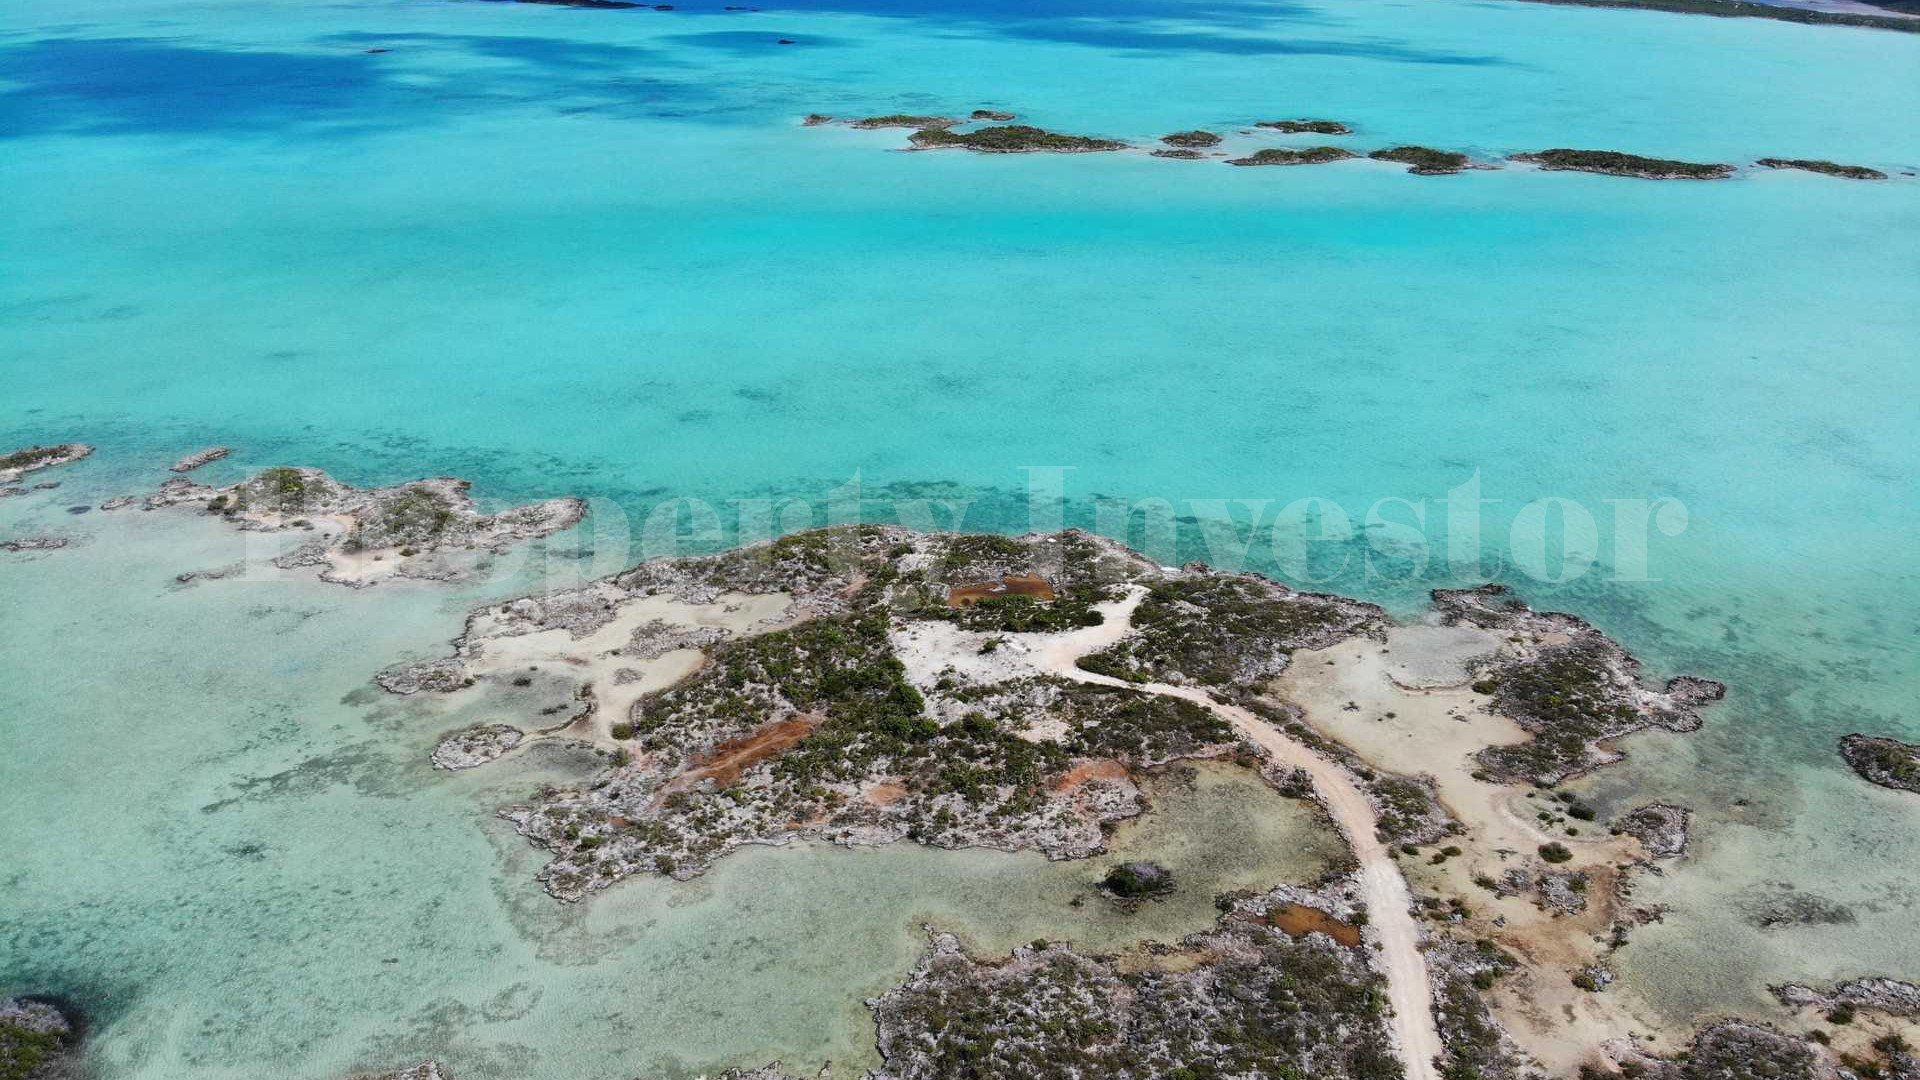 Extremely Unique 0.95 Hectare Lot for Residential Development in Turks & Caicos